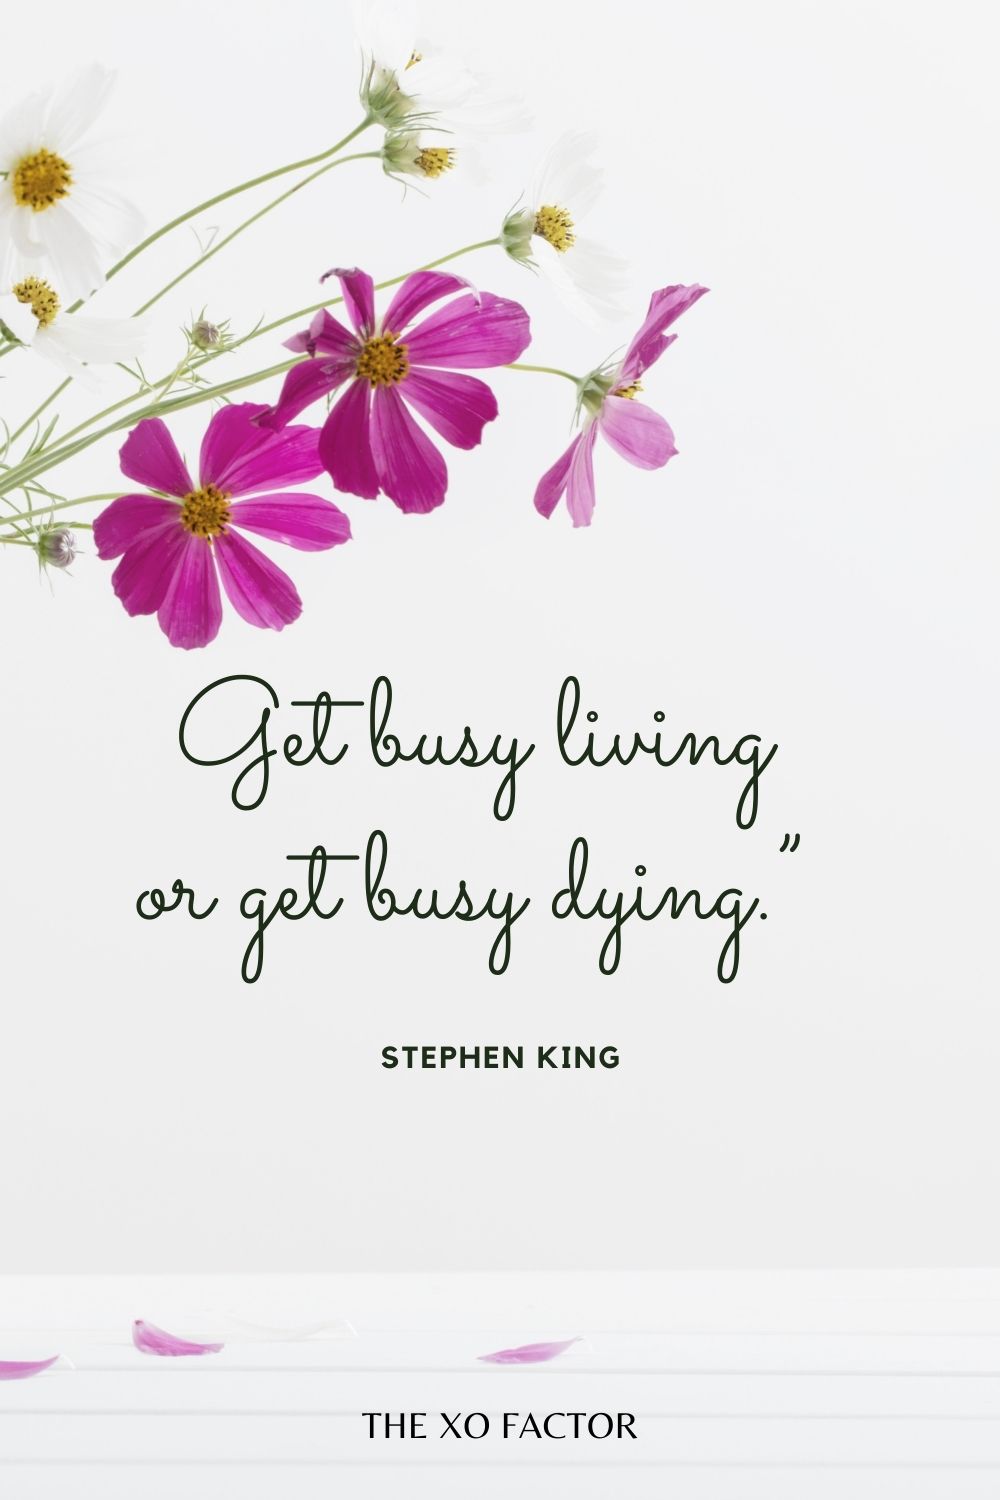 Get busy living or get busy dying.” Stephen King